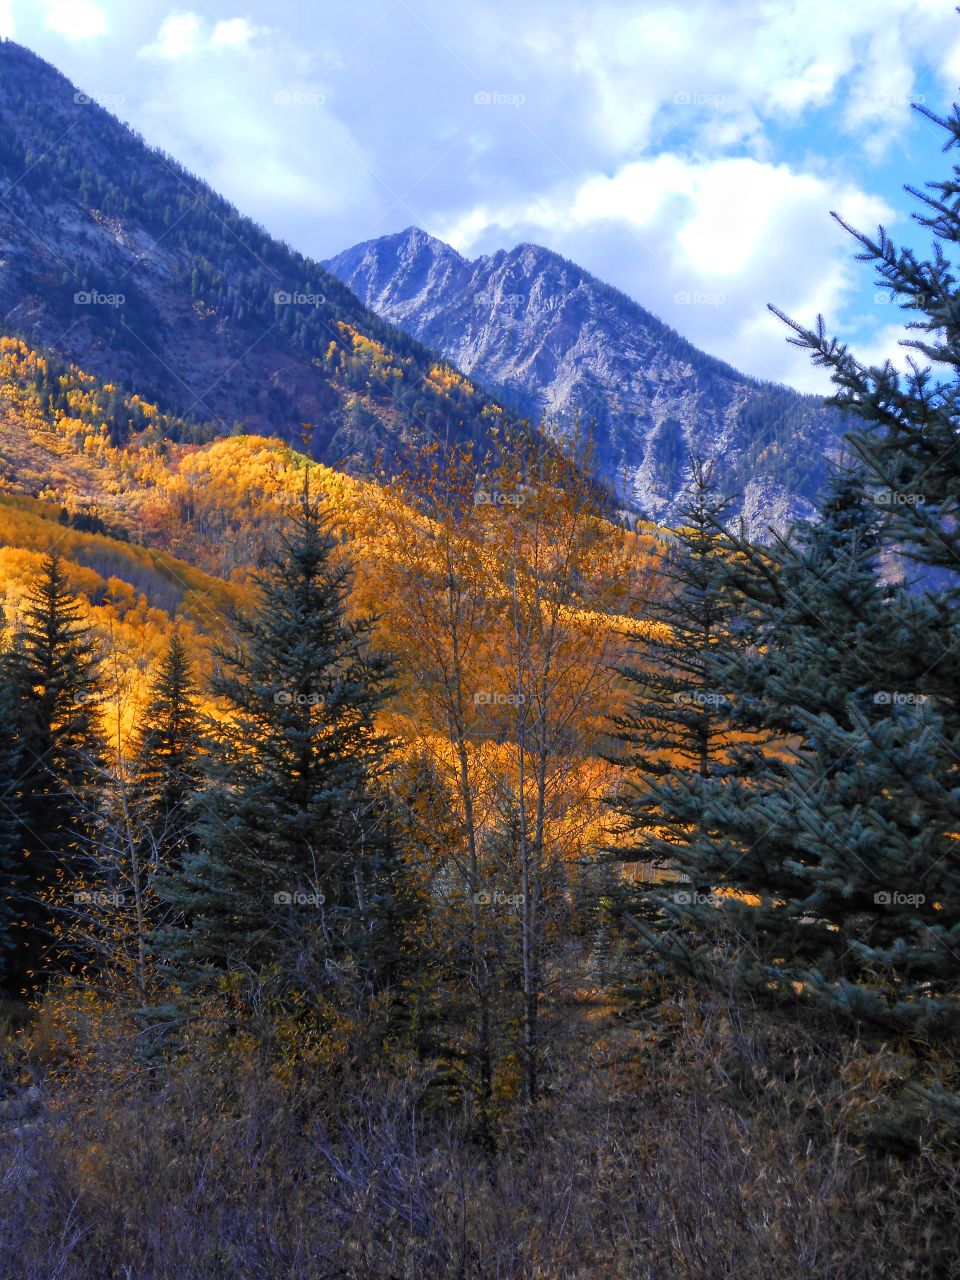 Majestic. mountains of Colorado clothed in Autumn splendor.